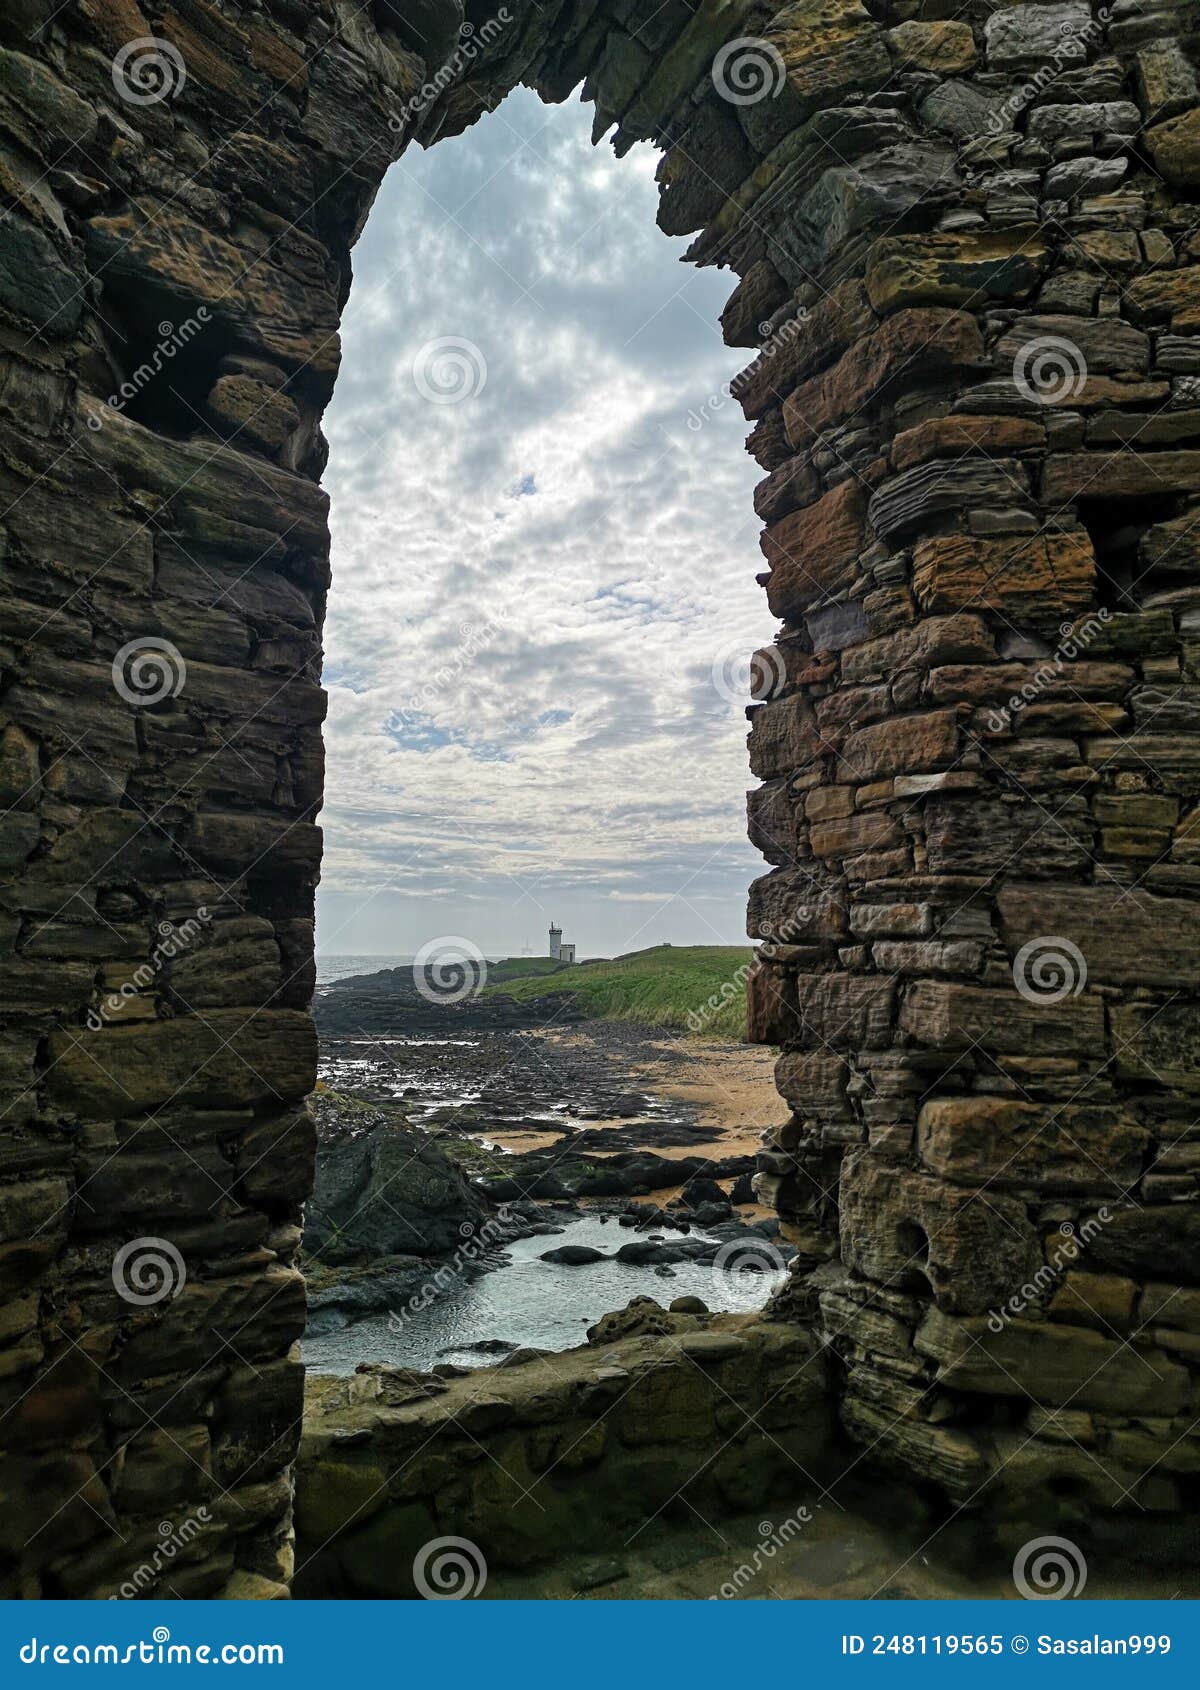 Landmarks and Landscapes of Elie in Fife Stock Image - Image of firth ...